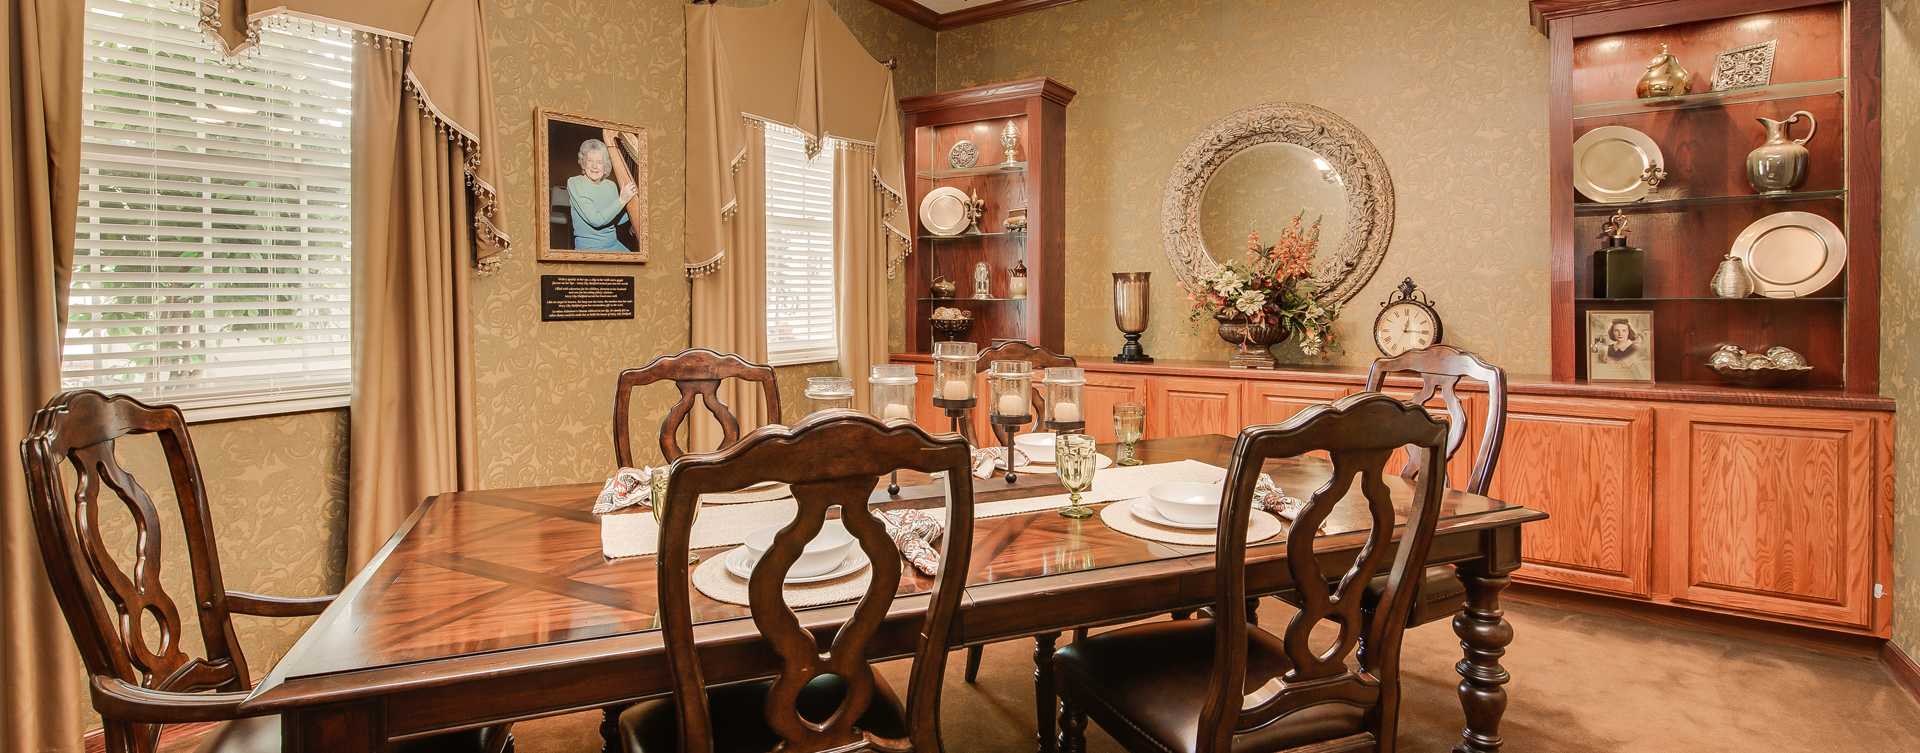 Food is best when shared with family and friends in the private dining room at Bickford of Portage